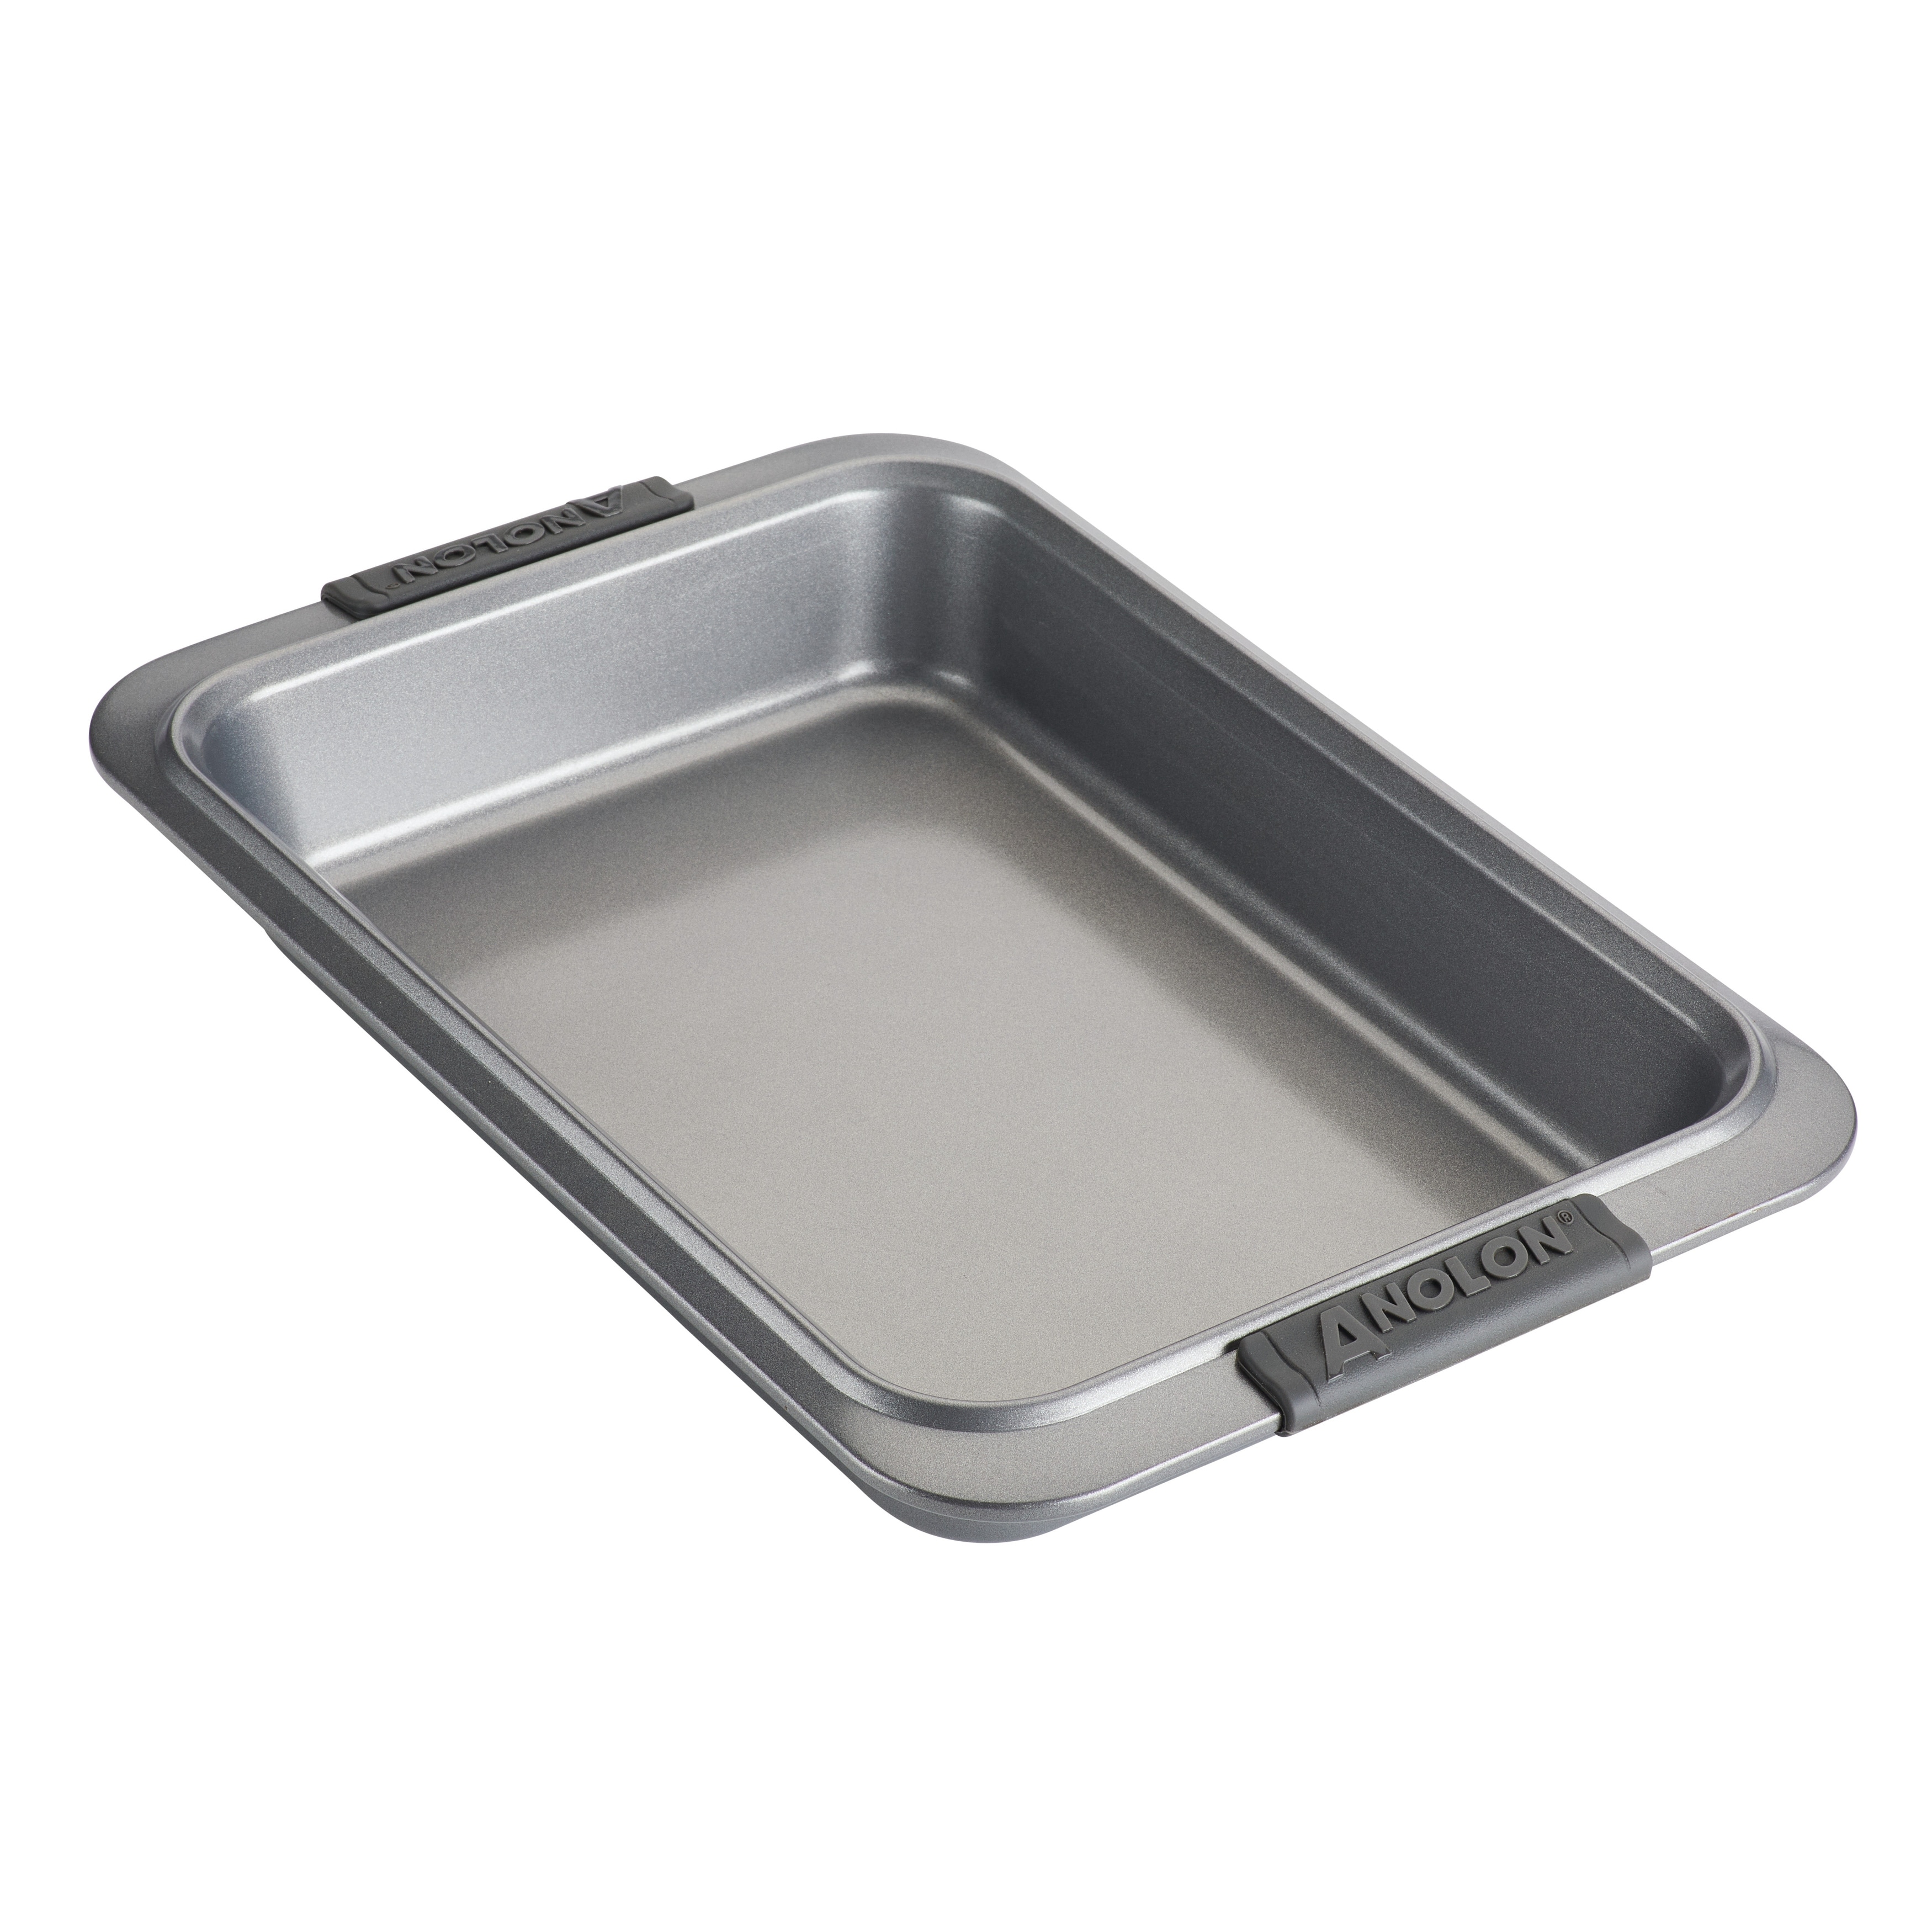 https://ak1.ostkcdn.com/images/products/is/images/direct/492b004b5a07bff62c62f68dad7e9c9d68e9819c/Anolon-Advanced-Bakeware-Nonstick-Rectangular-Cake-Pan%2C-9-Inch-x-13-Inch%2C-Gray-with-Silicone-Grips.jpg